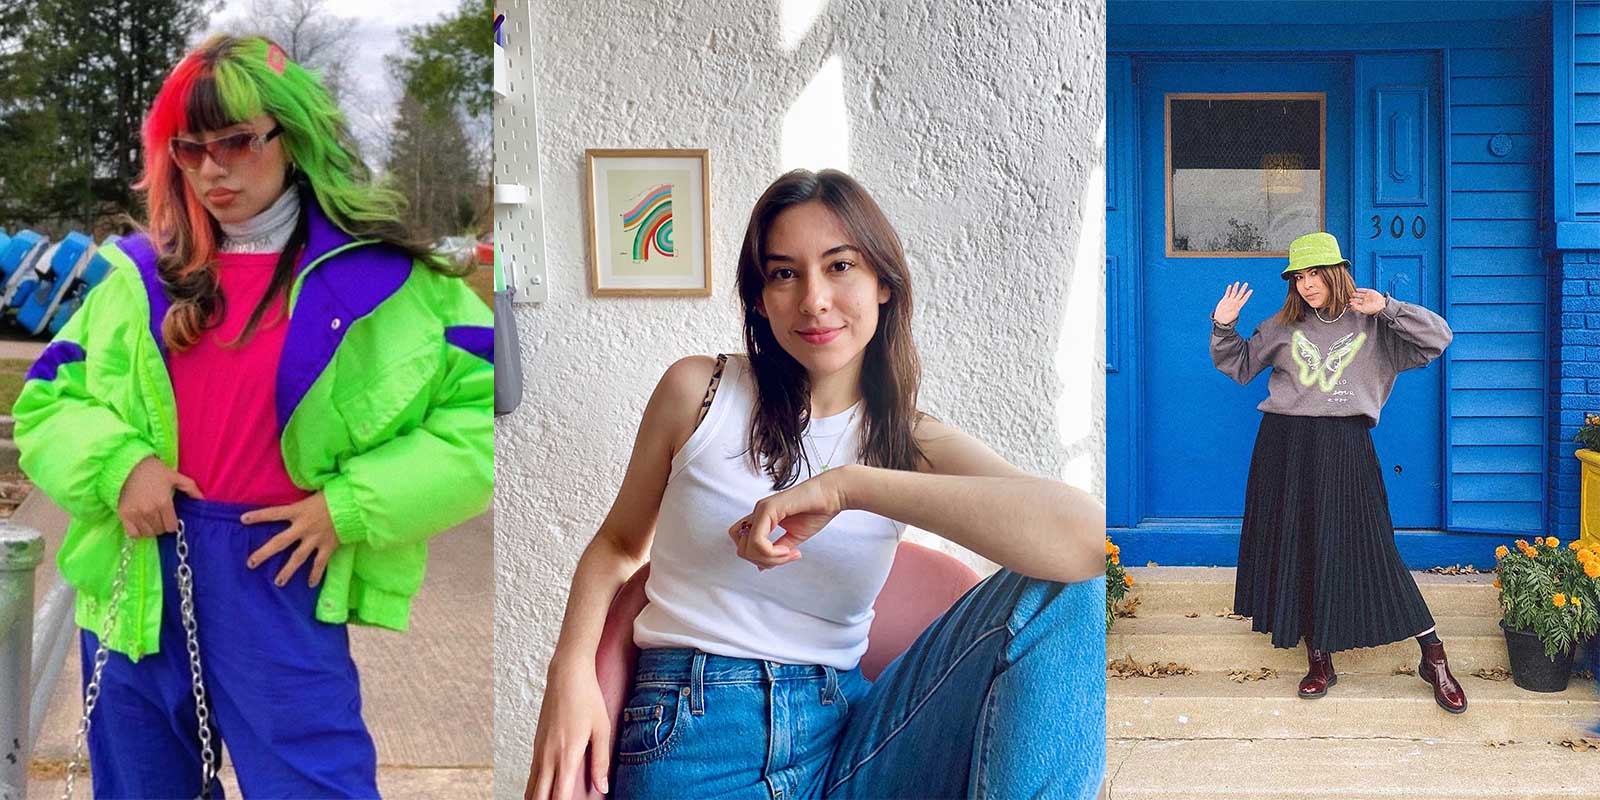 Latinx creative @SelenaDeFlor in a neon windbreaker set, @TaliaCu in a white tank and jeans, and @MinaDelTex in a grey sweater and black skirt